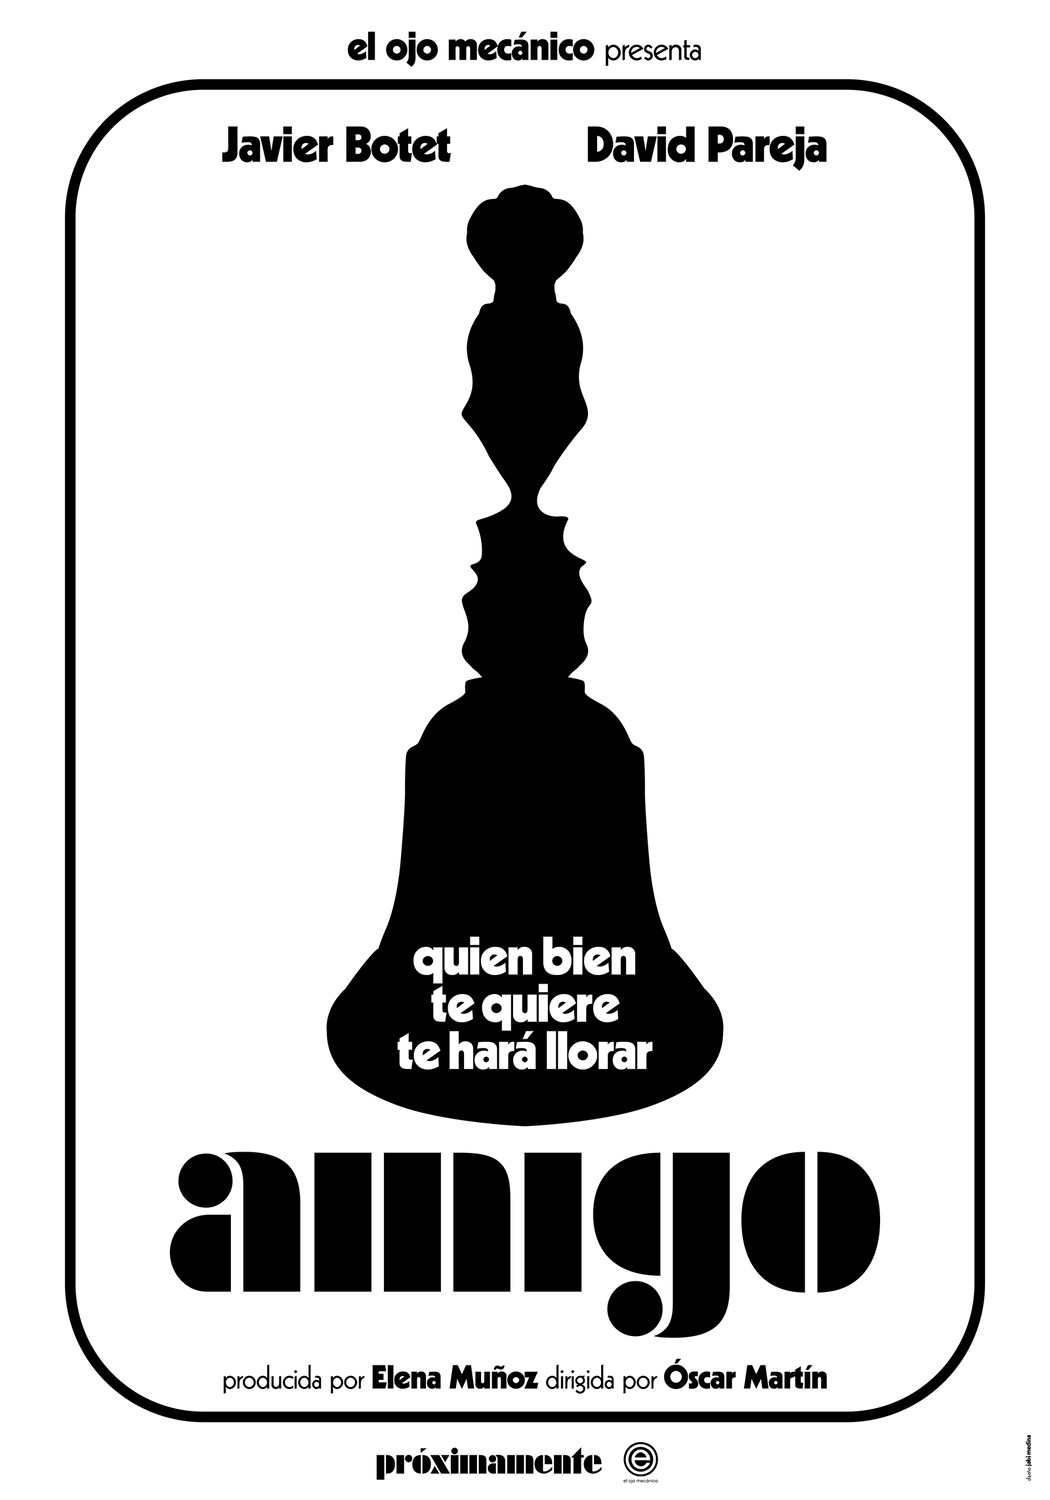 Extra Large Movie Poster Image for Amigo (#1 of 5)